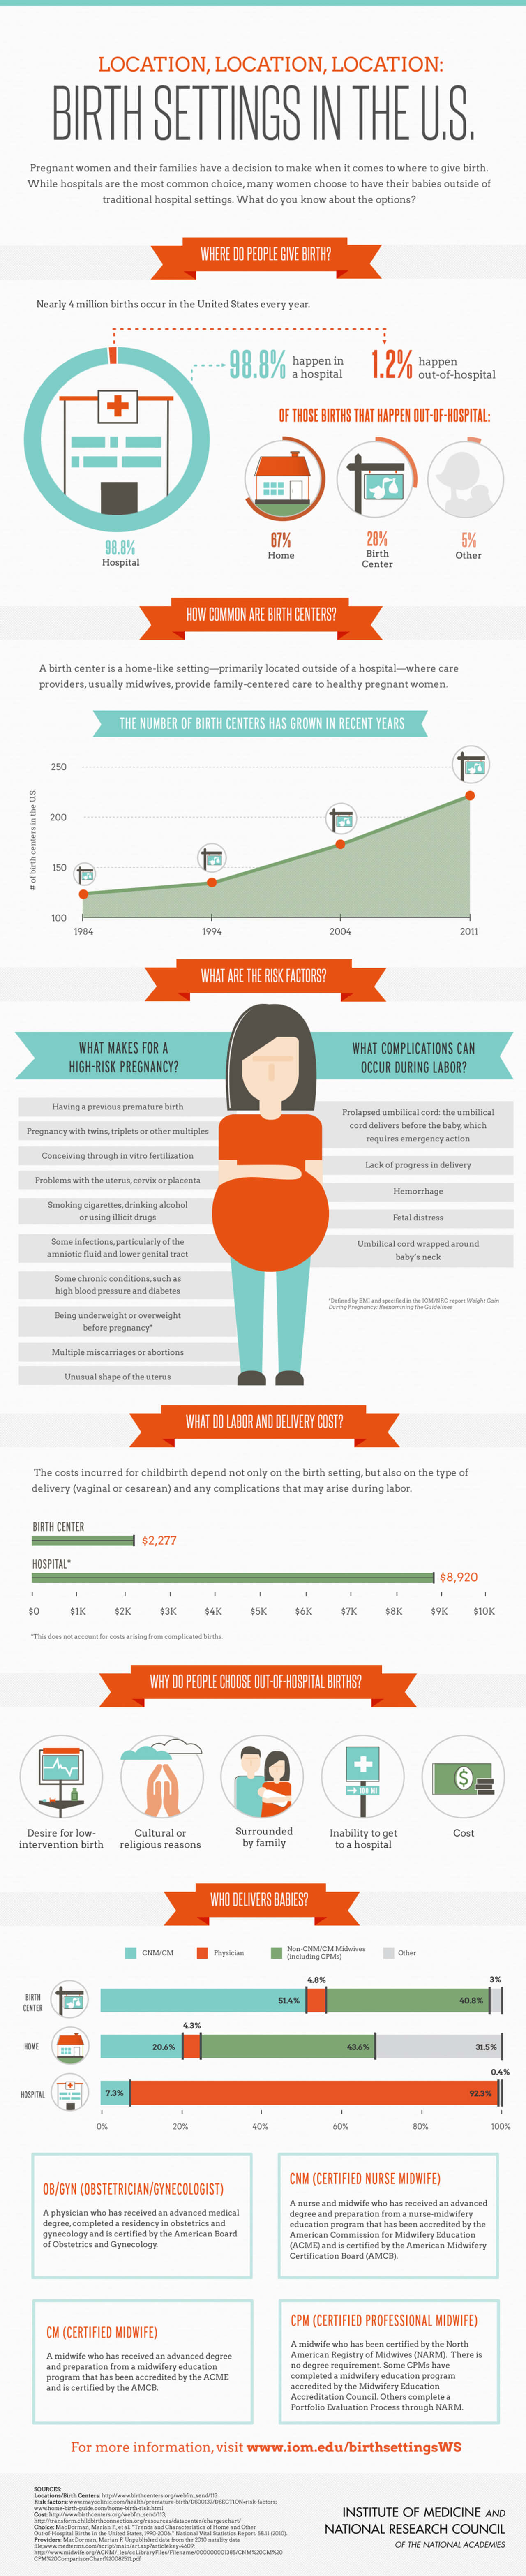 Best Infographics: Birth Settings in the U.S.